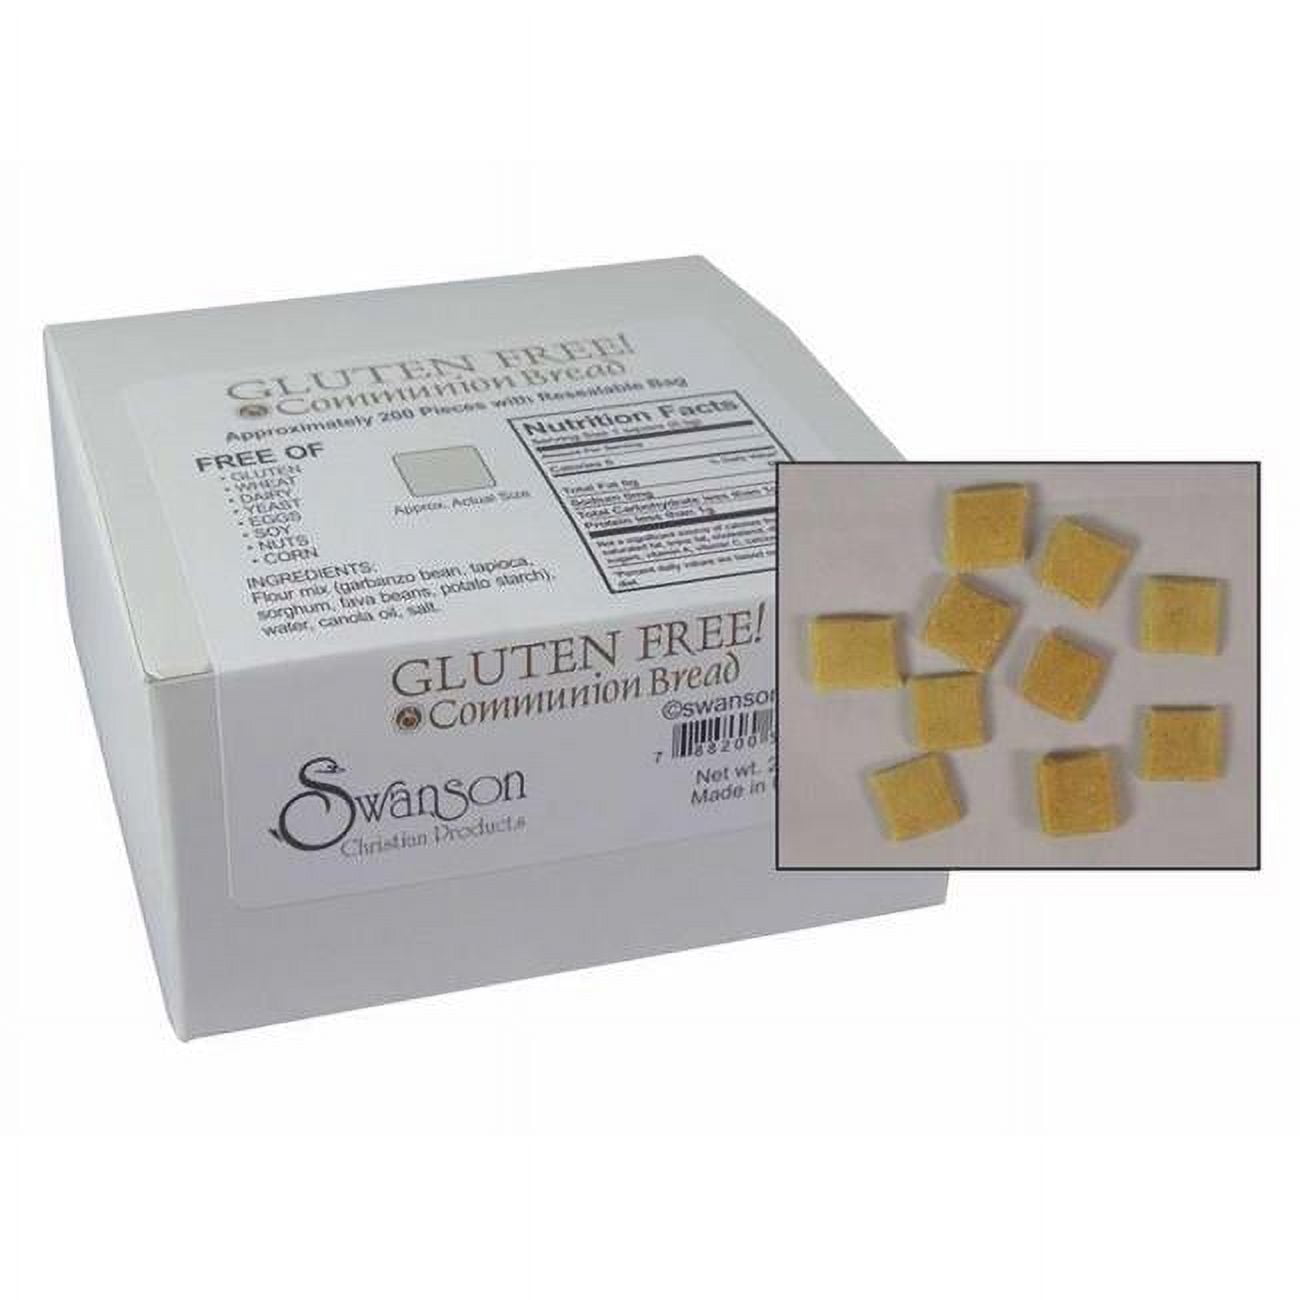 Picture of Swanson Christian Supply 84765 Communion-Baked Gluten Free Bread-Square - Pack of 200